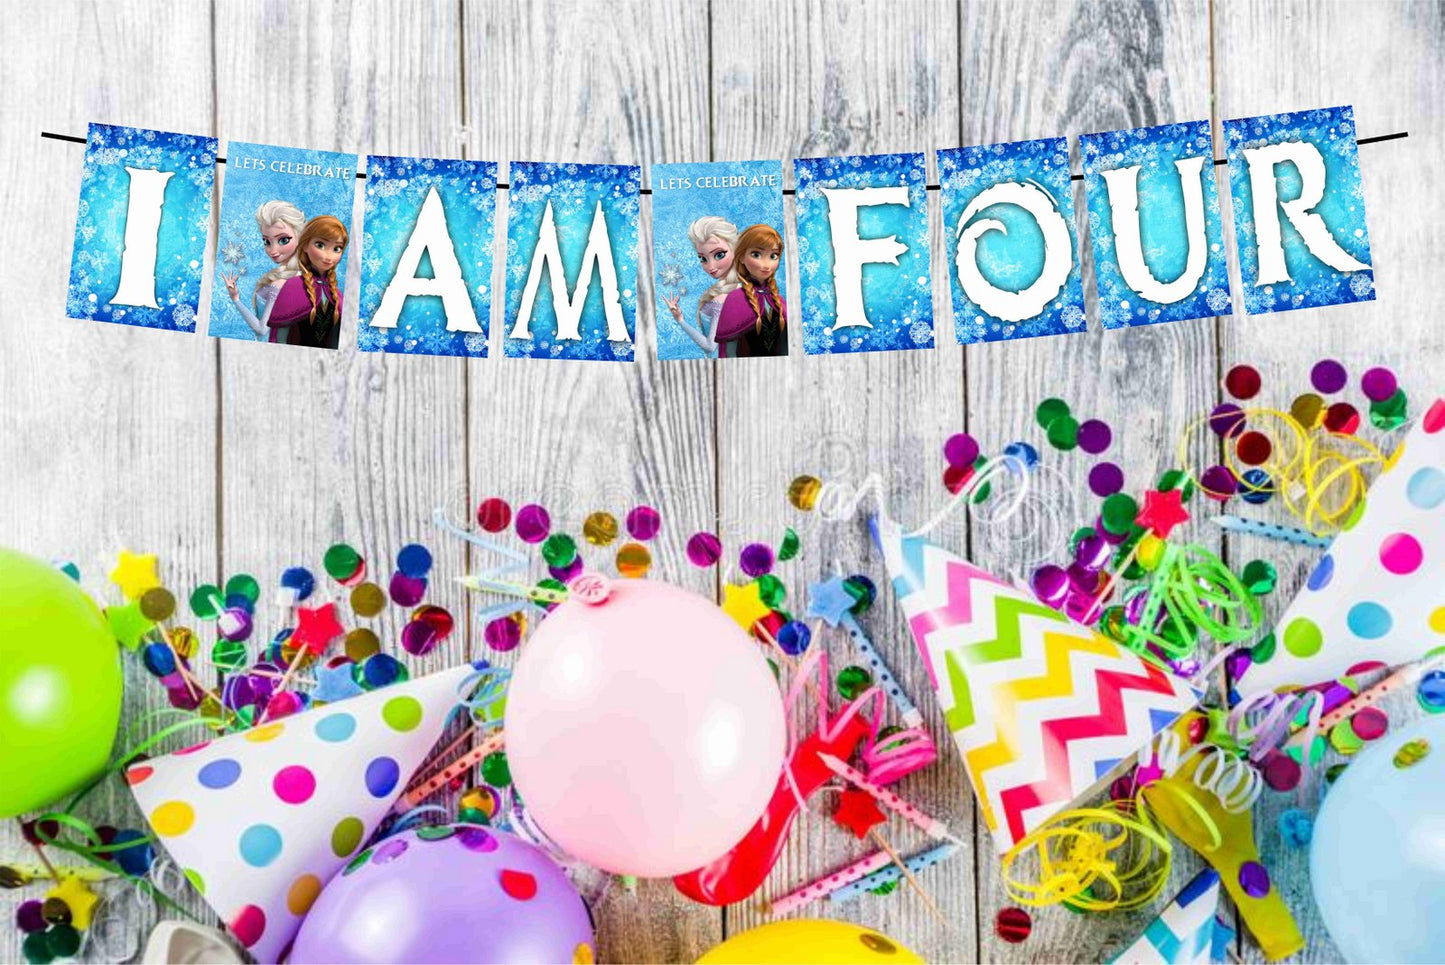 Frozen Theme I Am Four 4th Birthday Banner for Photo Shoot Backdrop and Theme Party